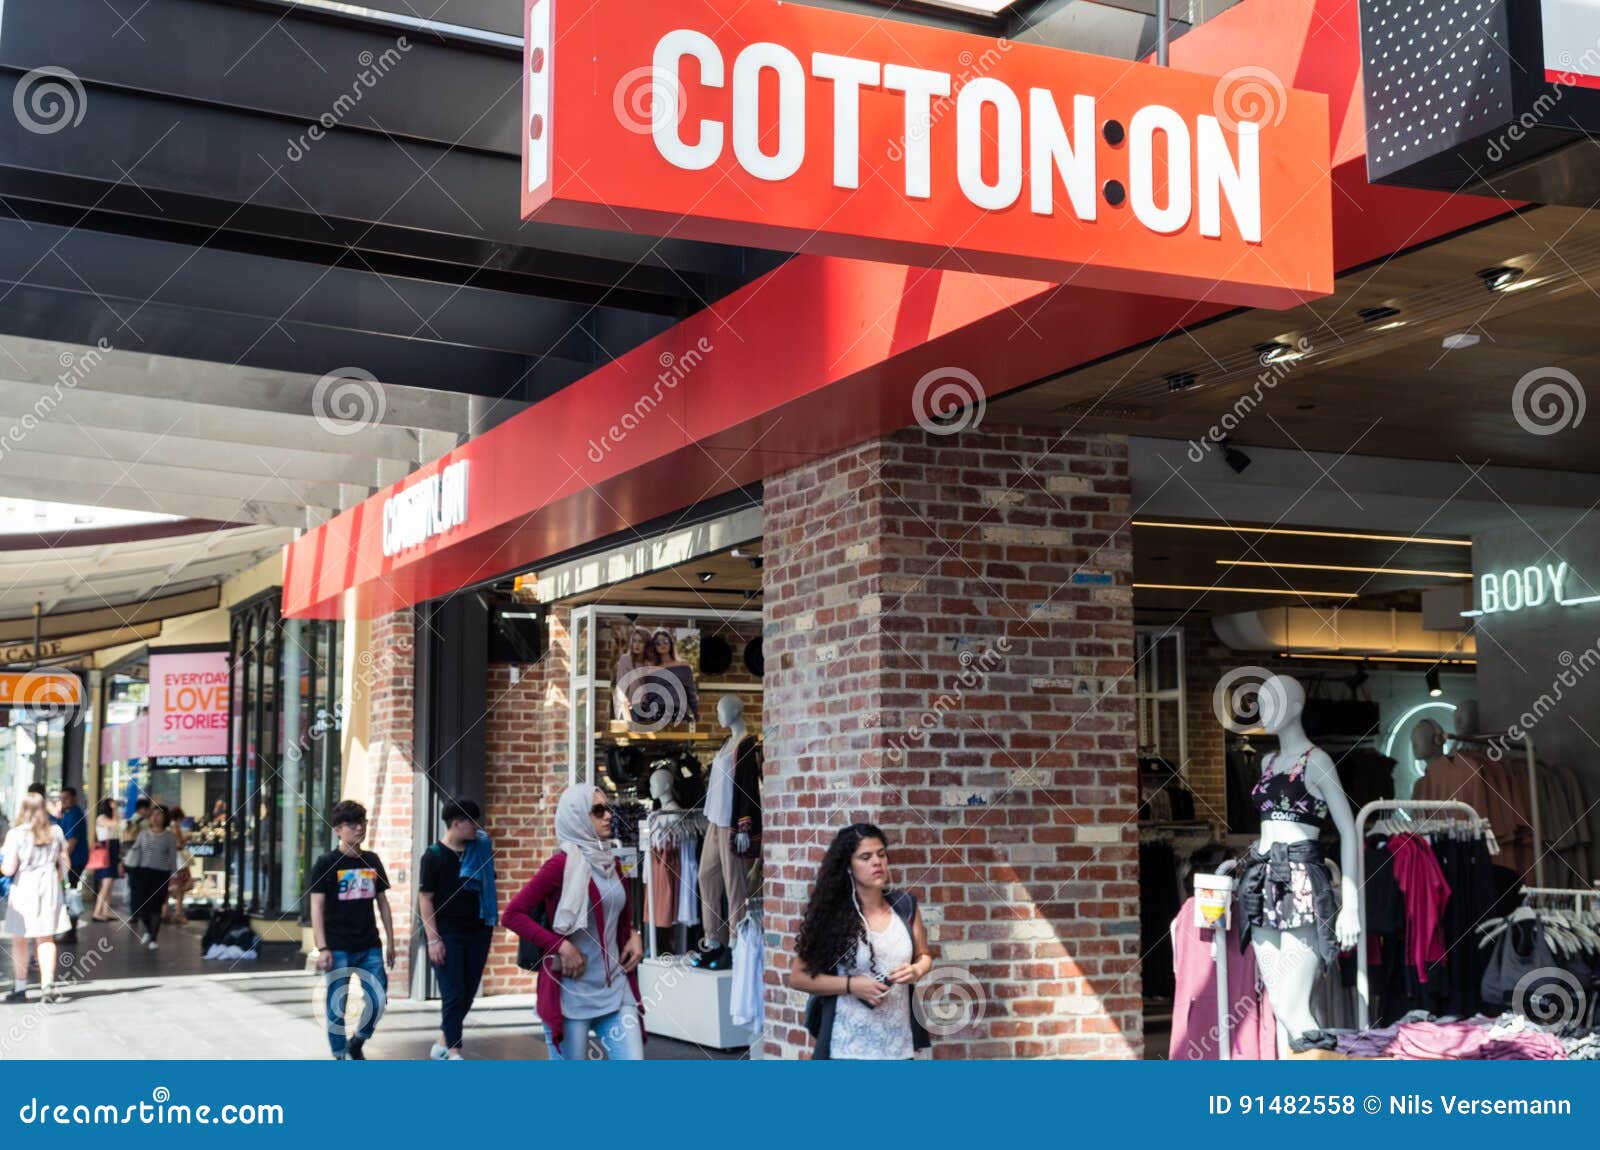 Cotton On Store In Bourke Street, Melbourne Editorial Stock Photo - Image of shop, fashion: 91482558